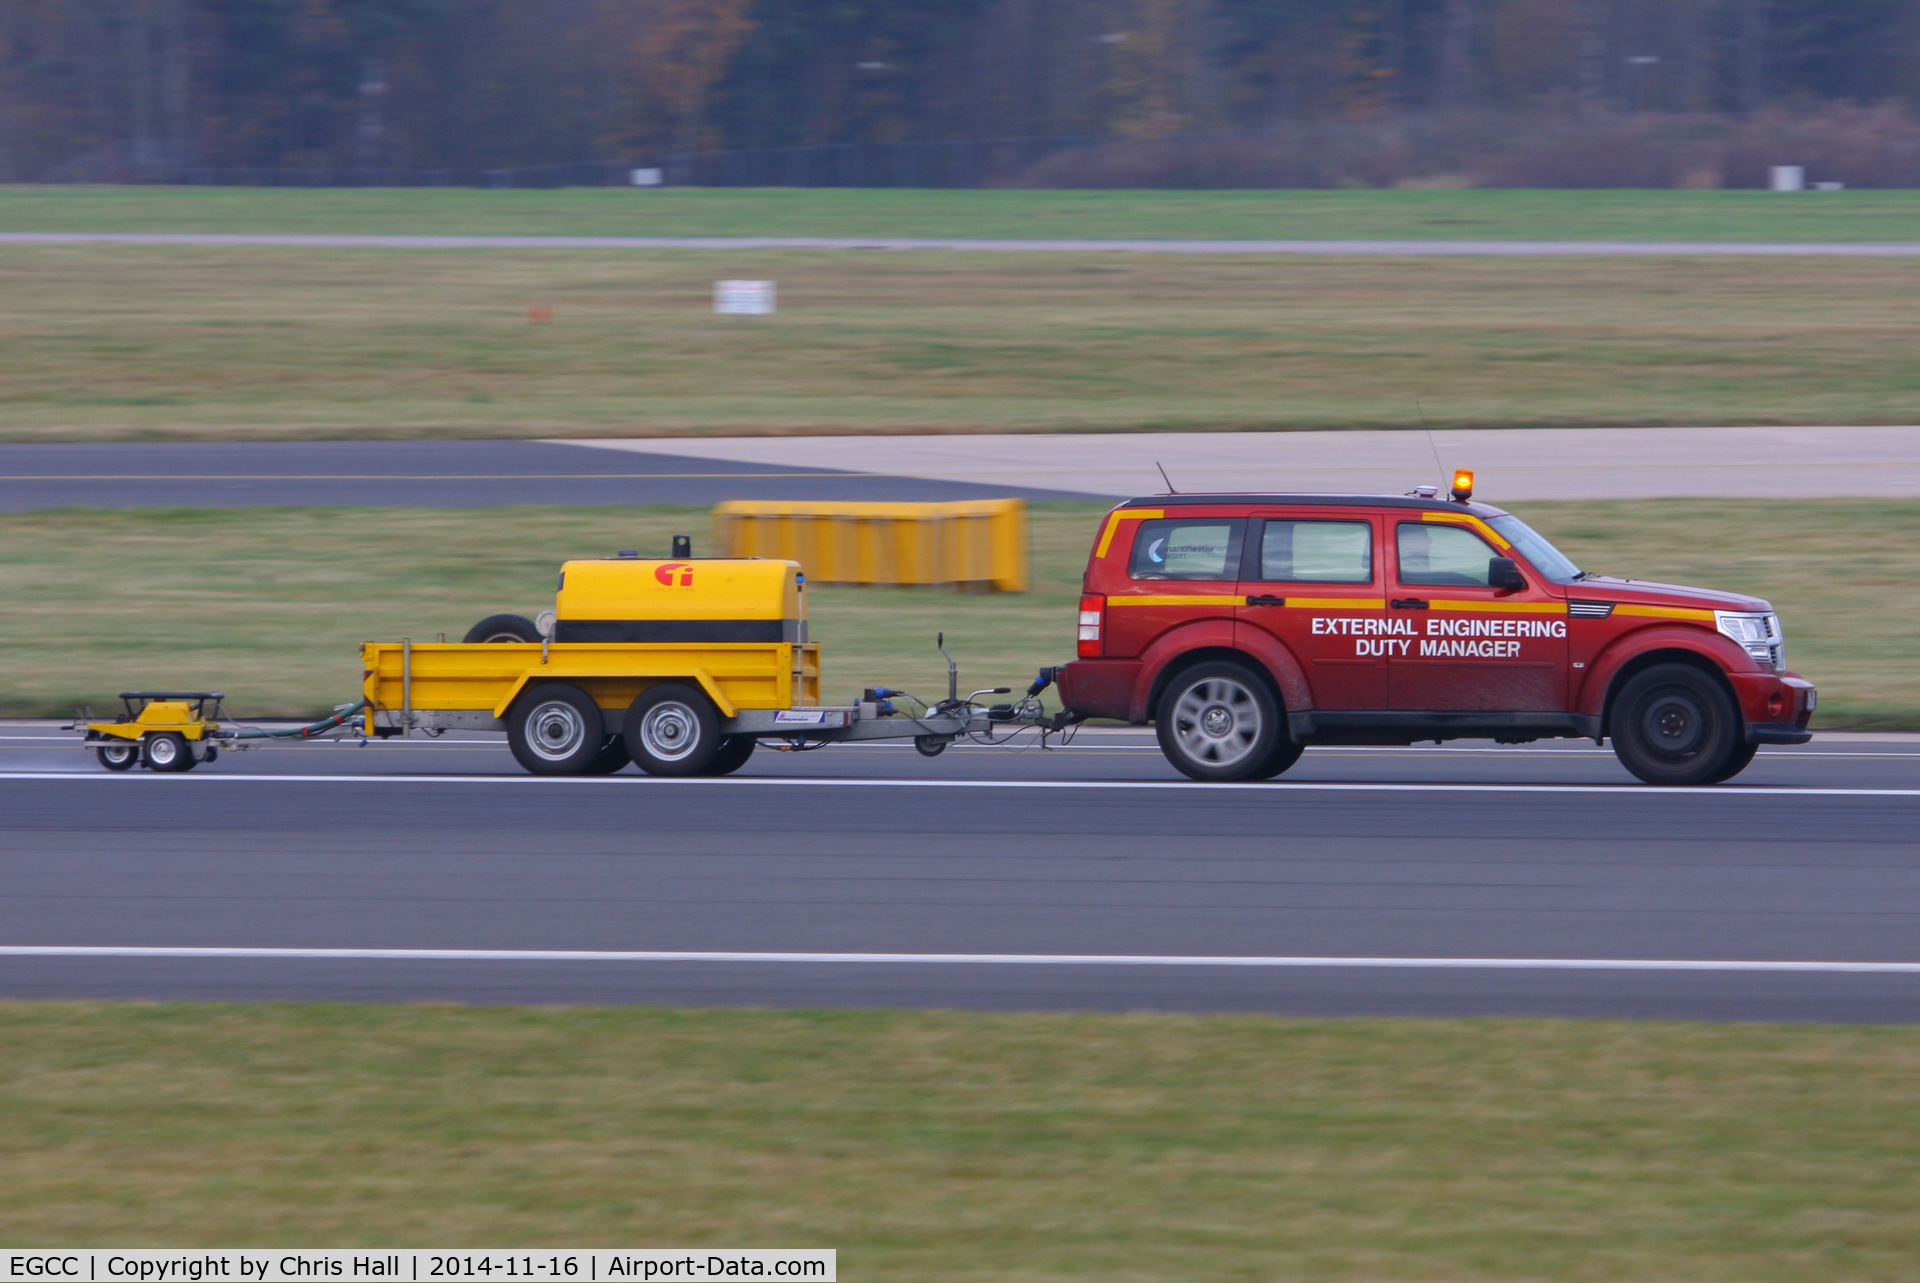 Manchester Airport, Manchester, England United Kingdom (EGCC) - runway surface friction testing